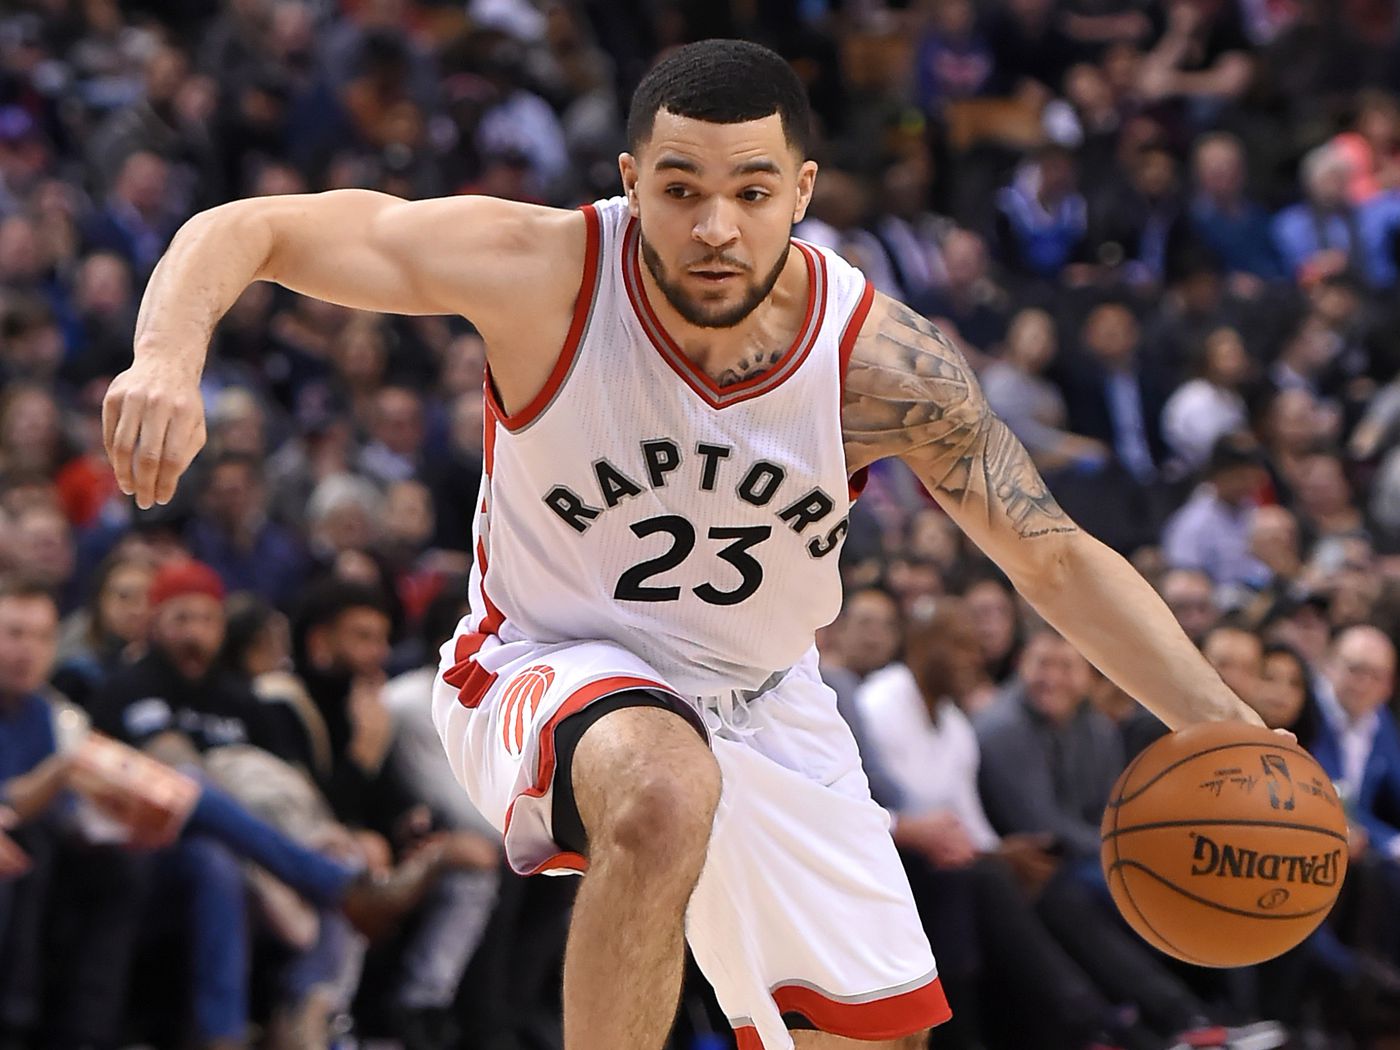 SOURCE SPORTS: Fred VanVleet Scores 54 Points, Setting Record For An Undrafted Player